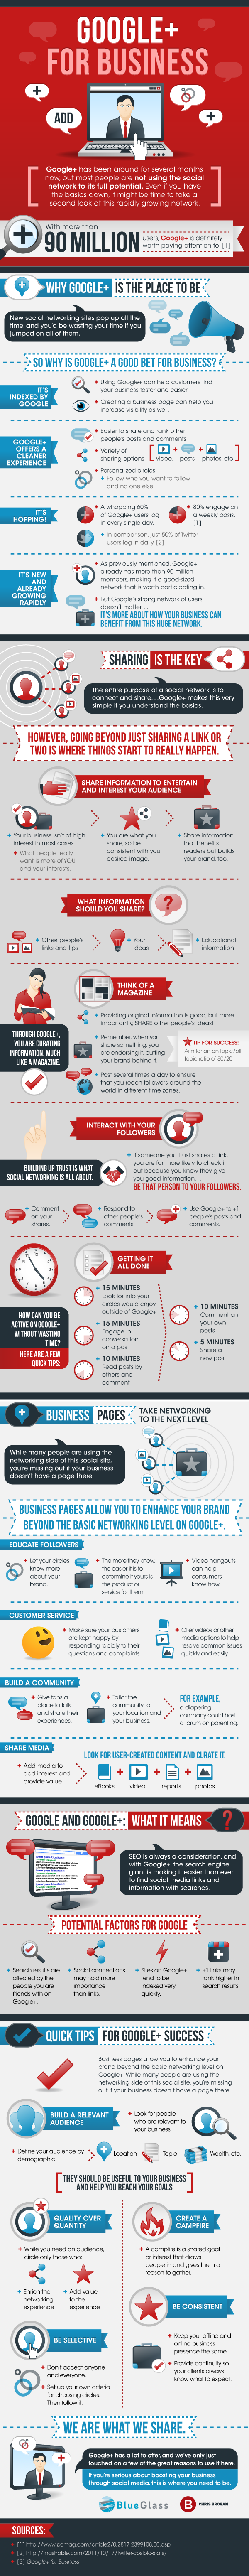 Google+ For Business InfoGraphic